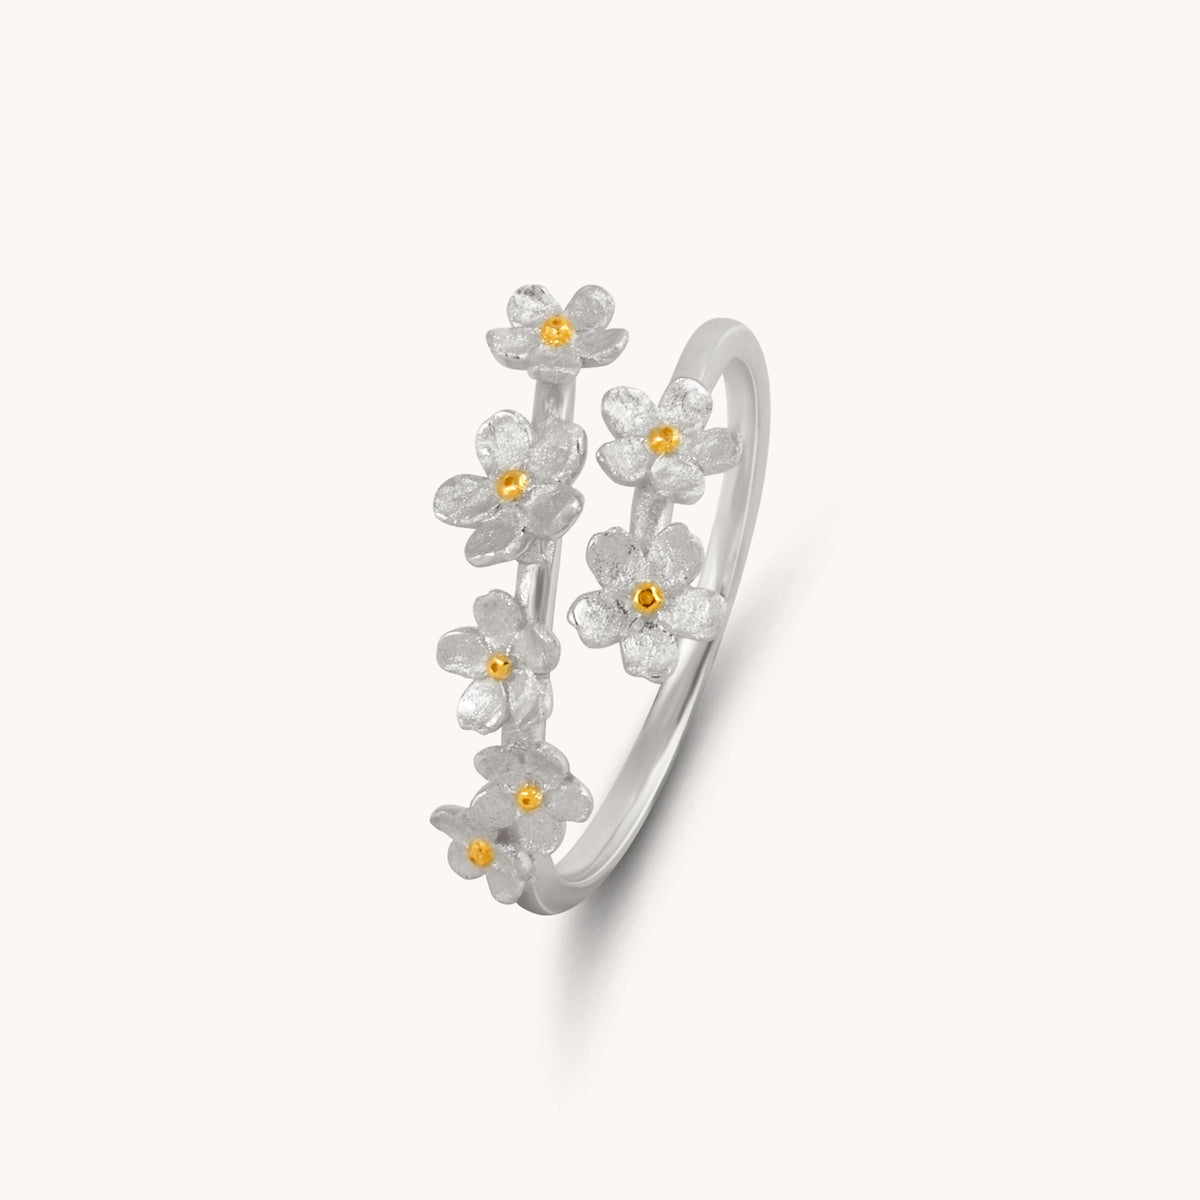 Cherry Blossom Silver Adjustable Ring